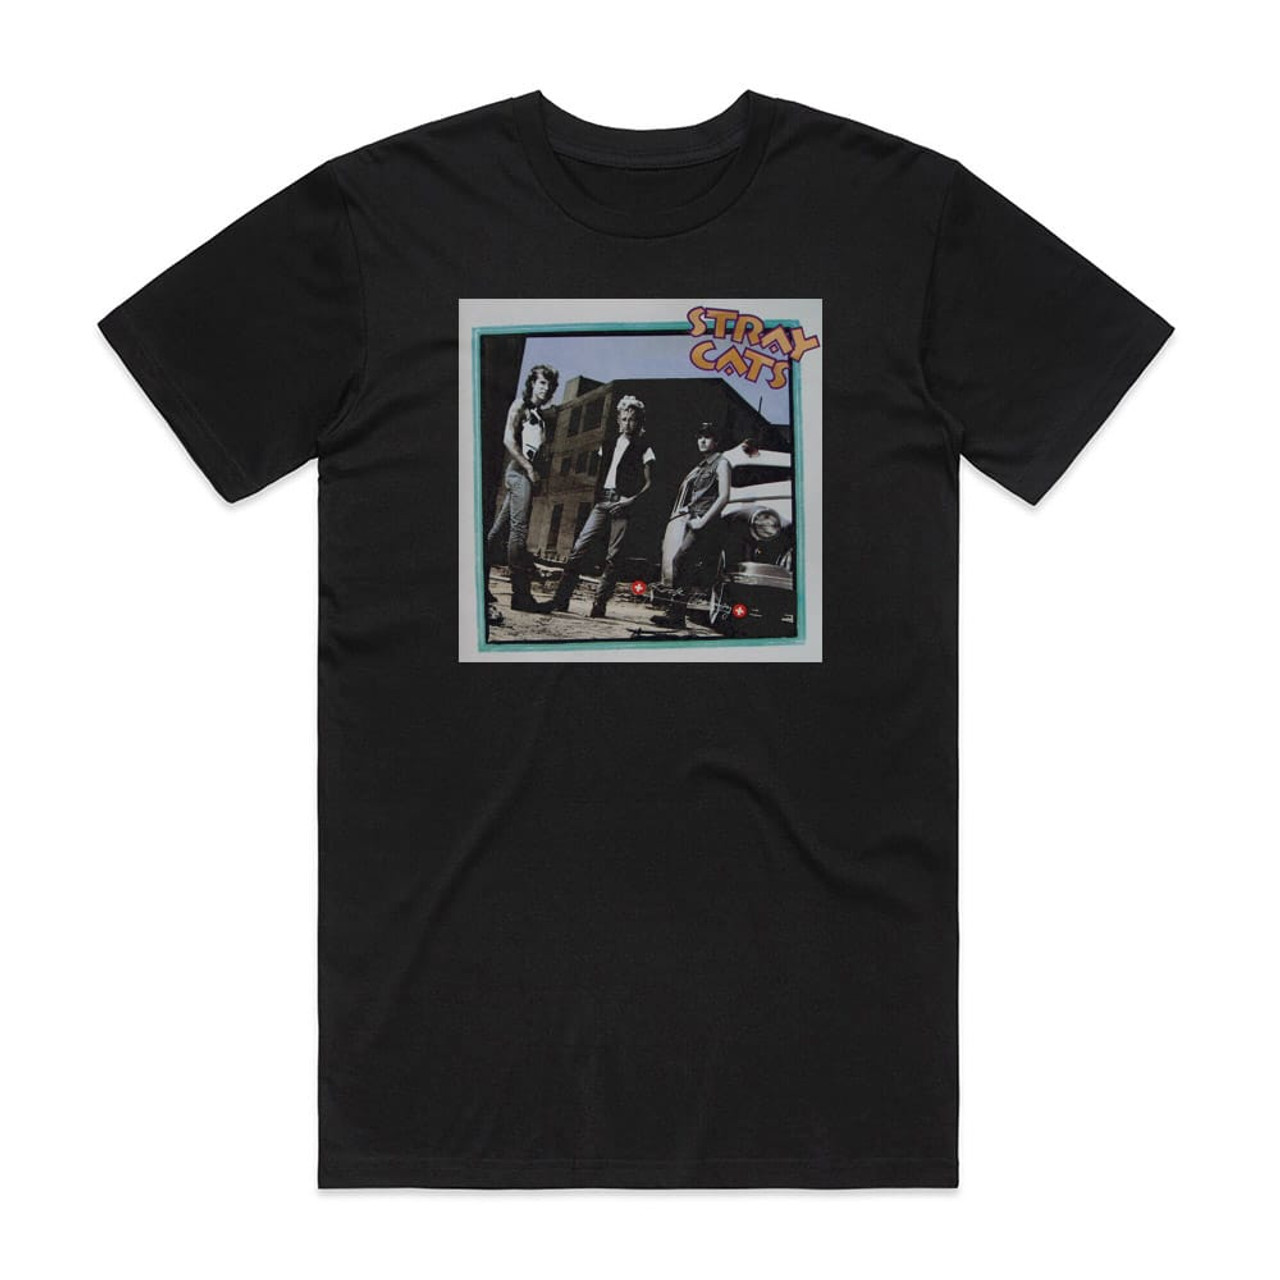 Stray Cats Rock Therapy Album Cover T-Shirt Black